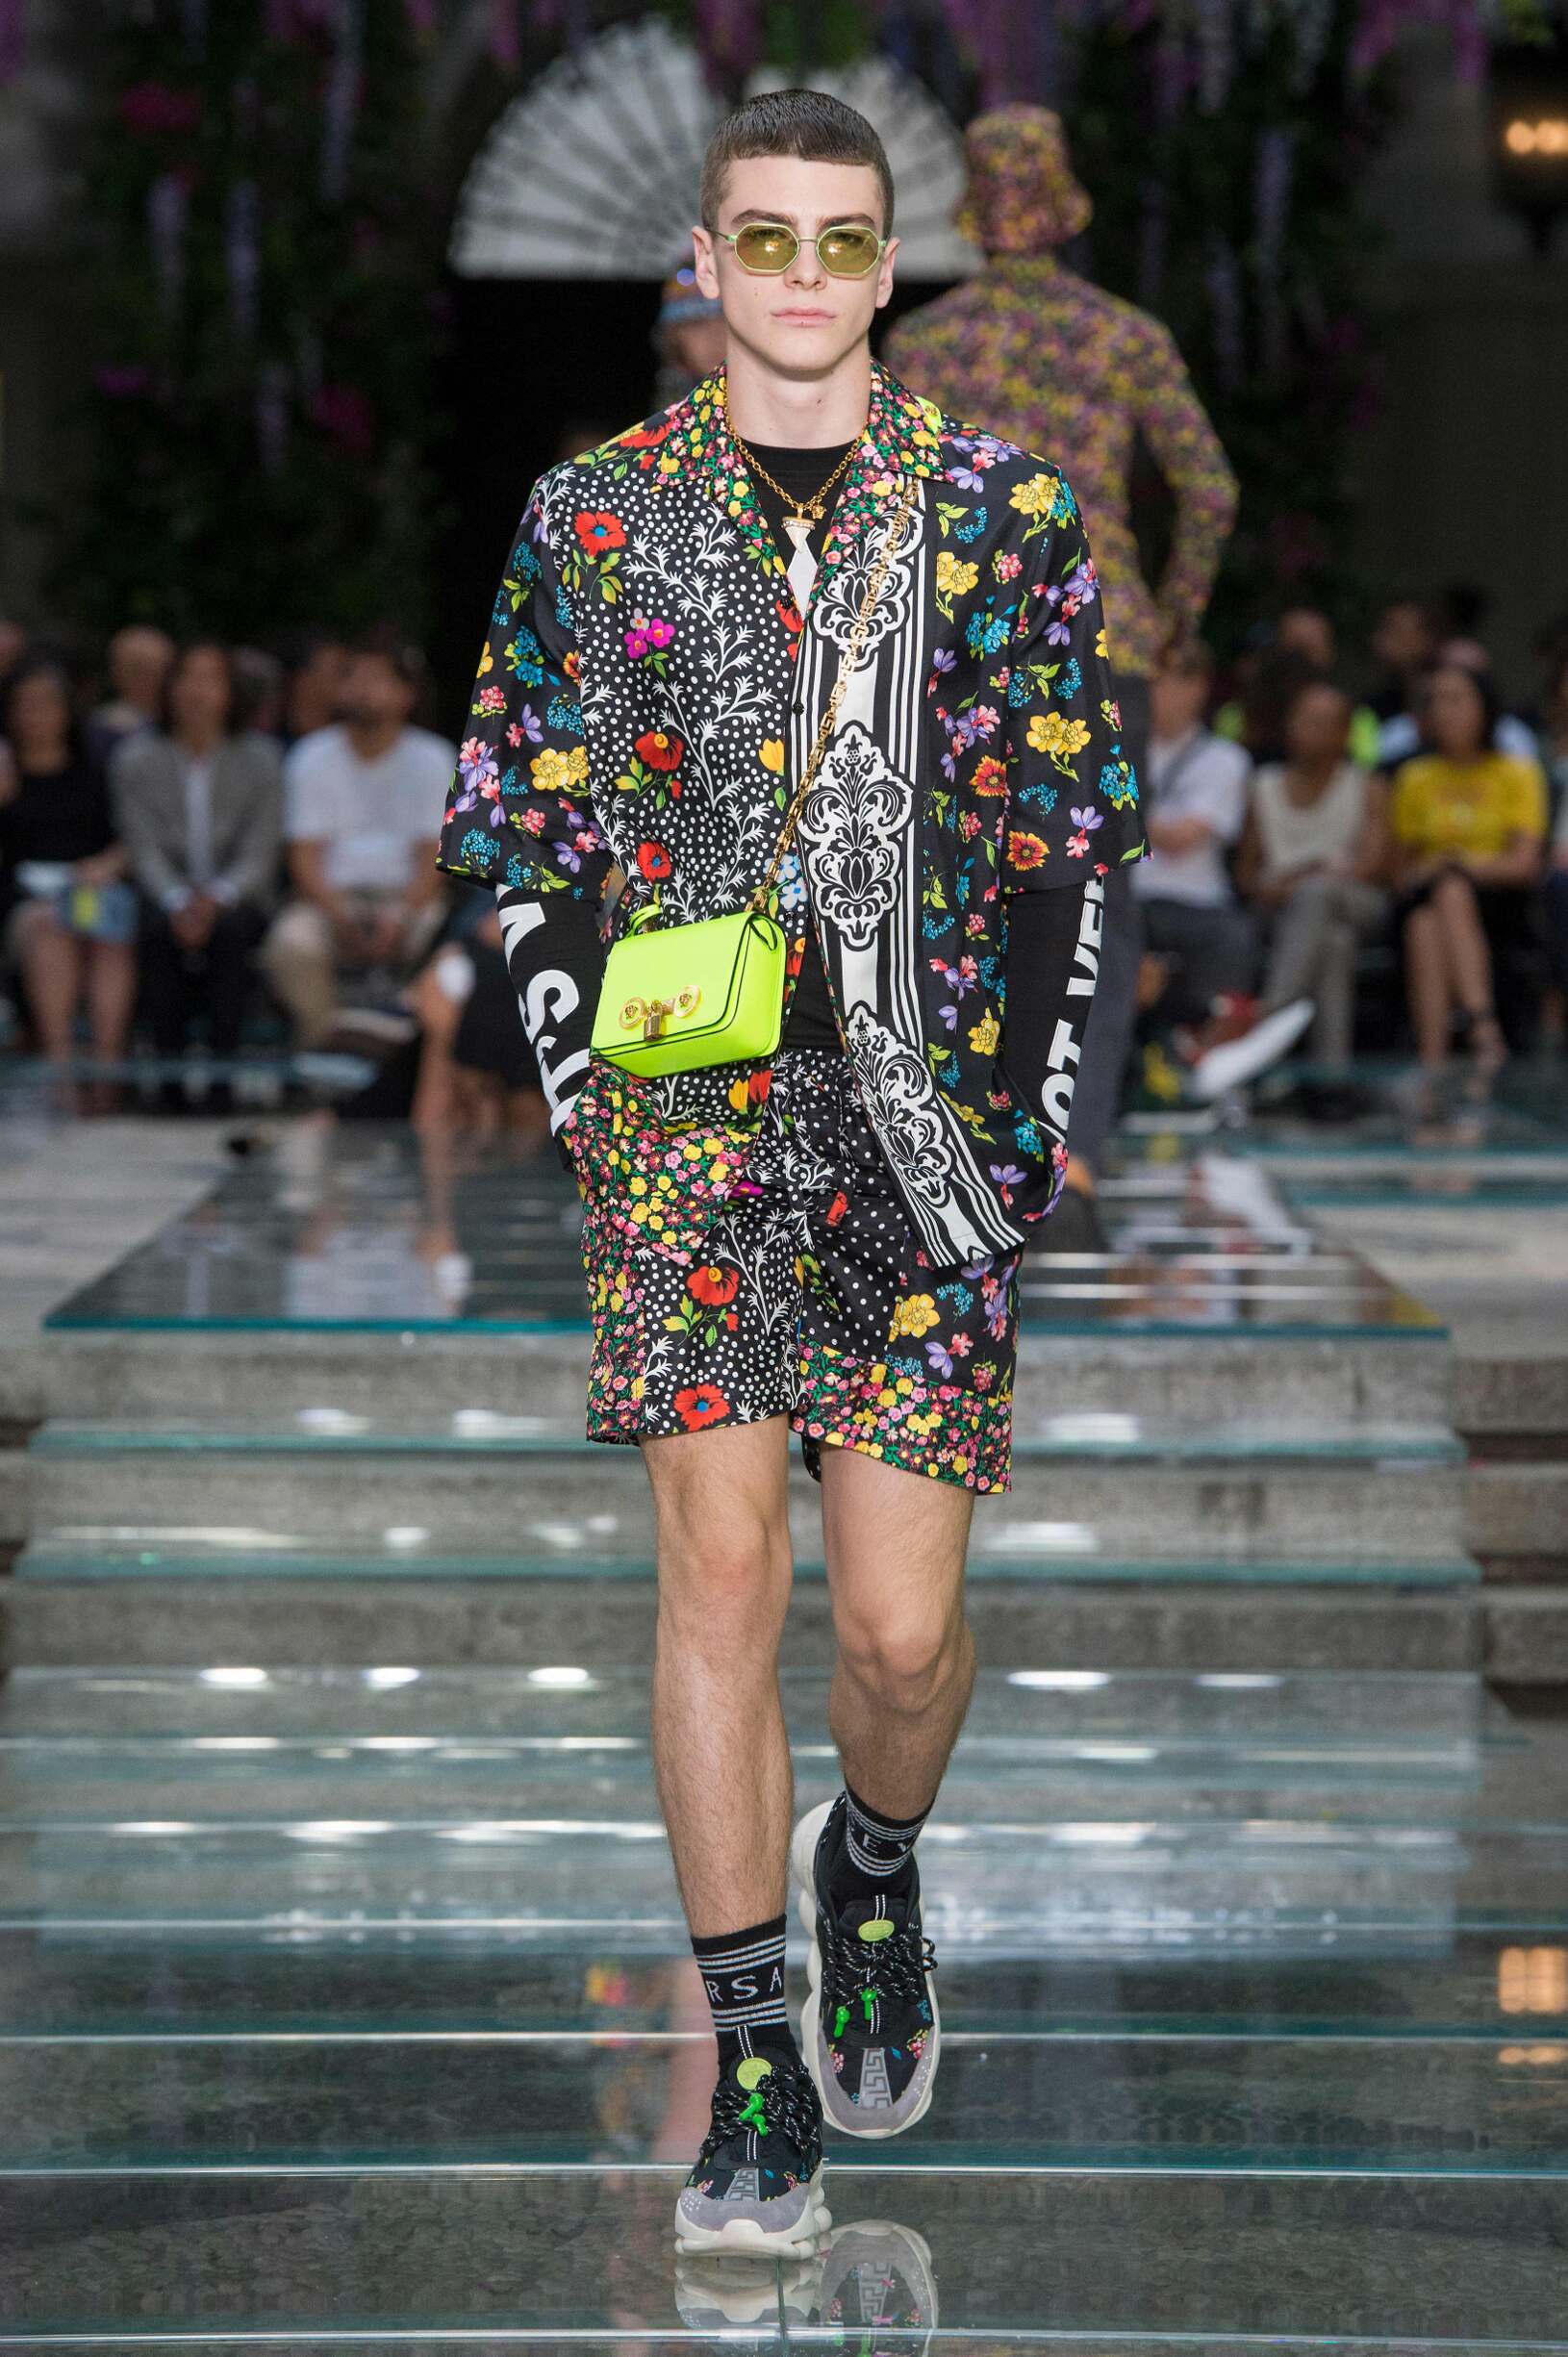 VERSACE SPRING SUMMER 2019 MEN’S COLLECTION | The Skinny Beep